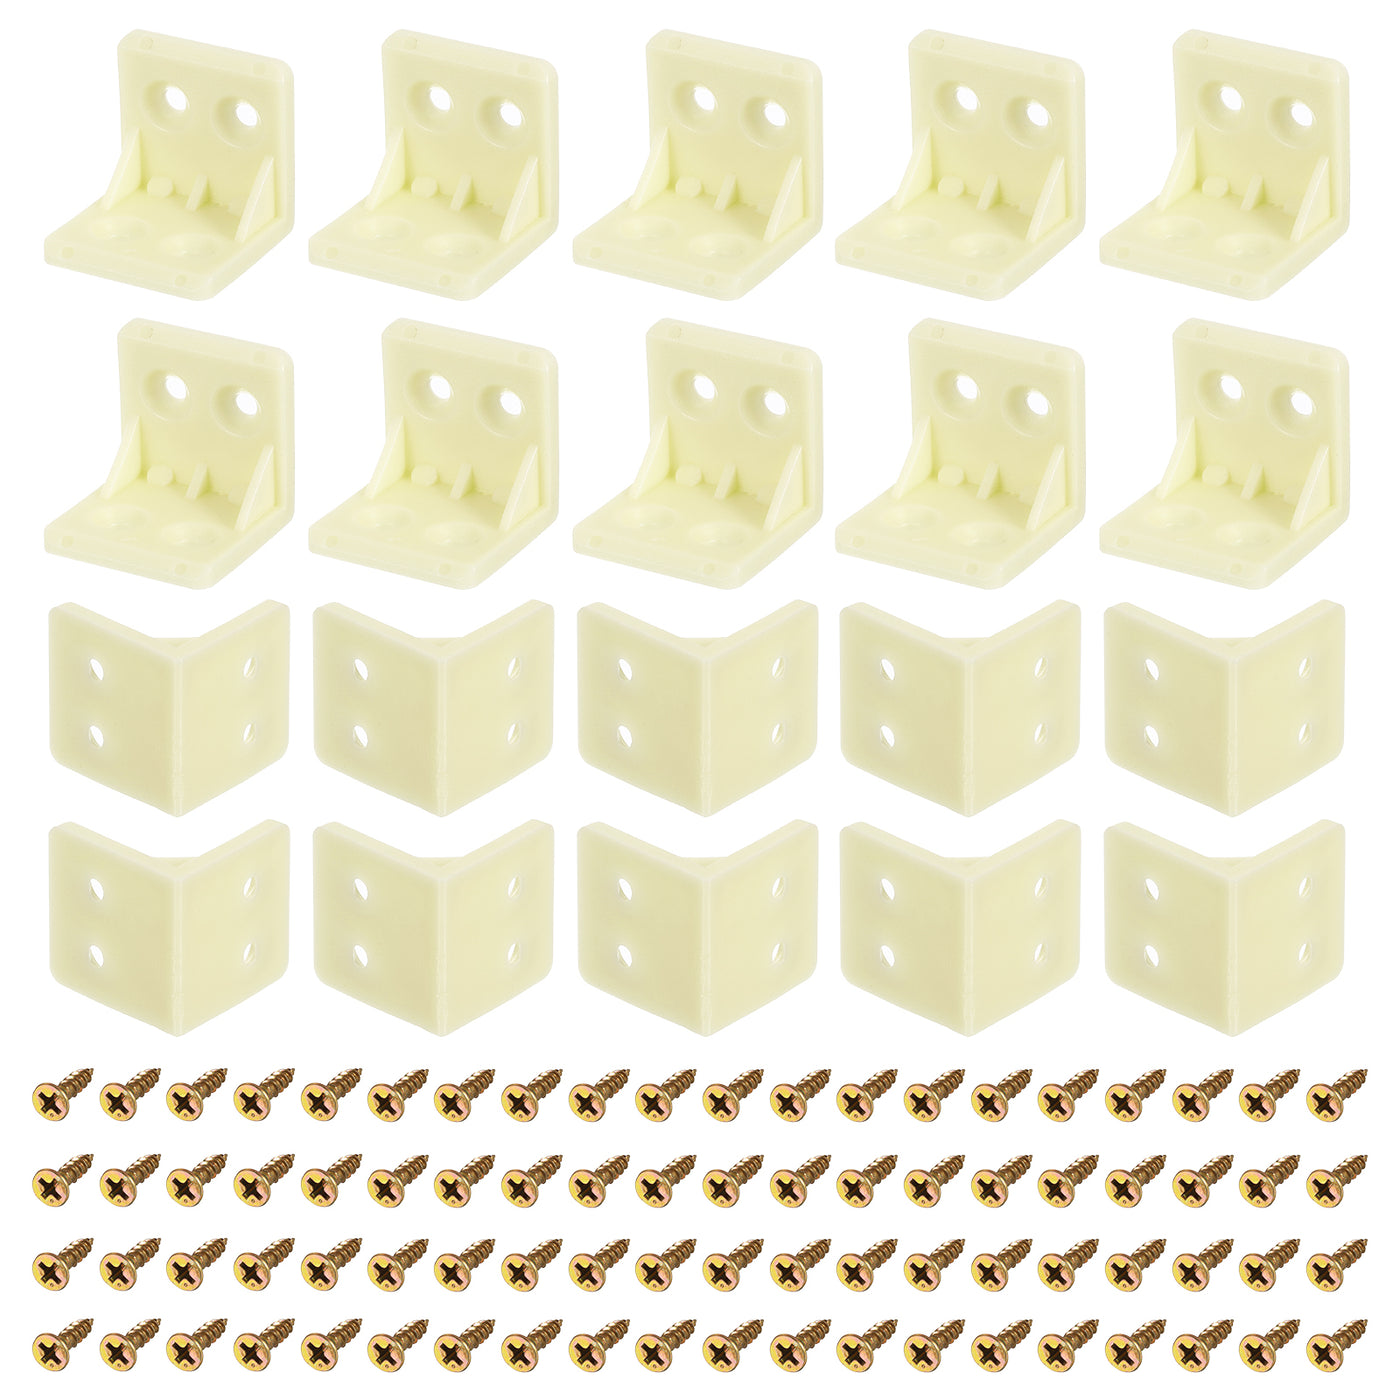 uxcell Uxcell 30Pcs 90 Degree Plastic Corner Braces, 27.3x27x27mm Nylon Shelf Right Angle Brackets with Screws for Cabinets, Cupboards (Beige Yellow)